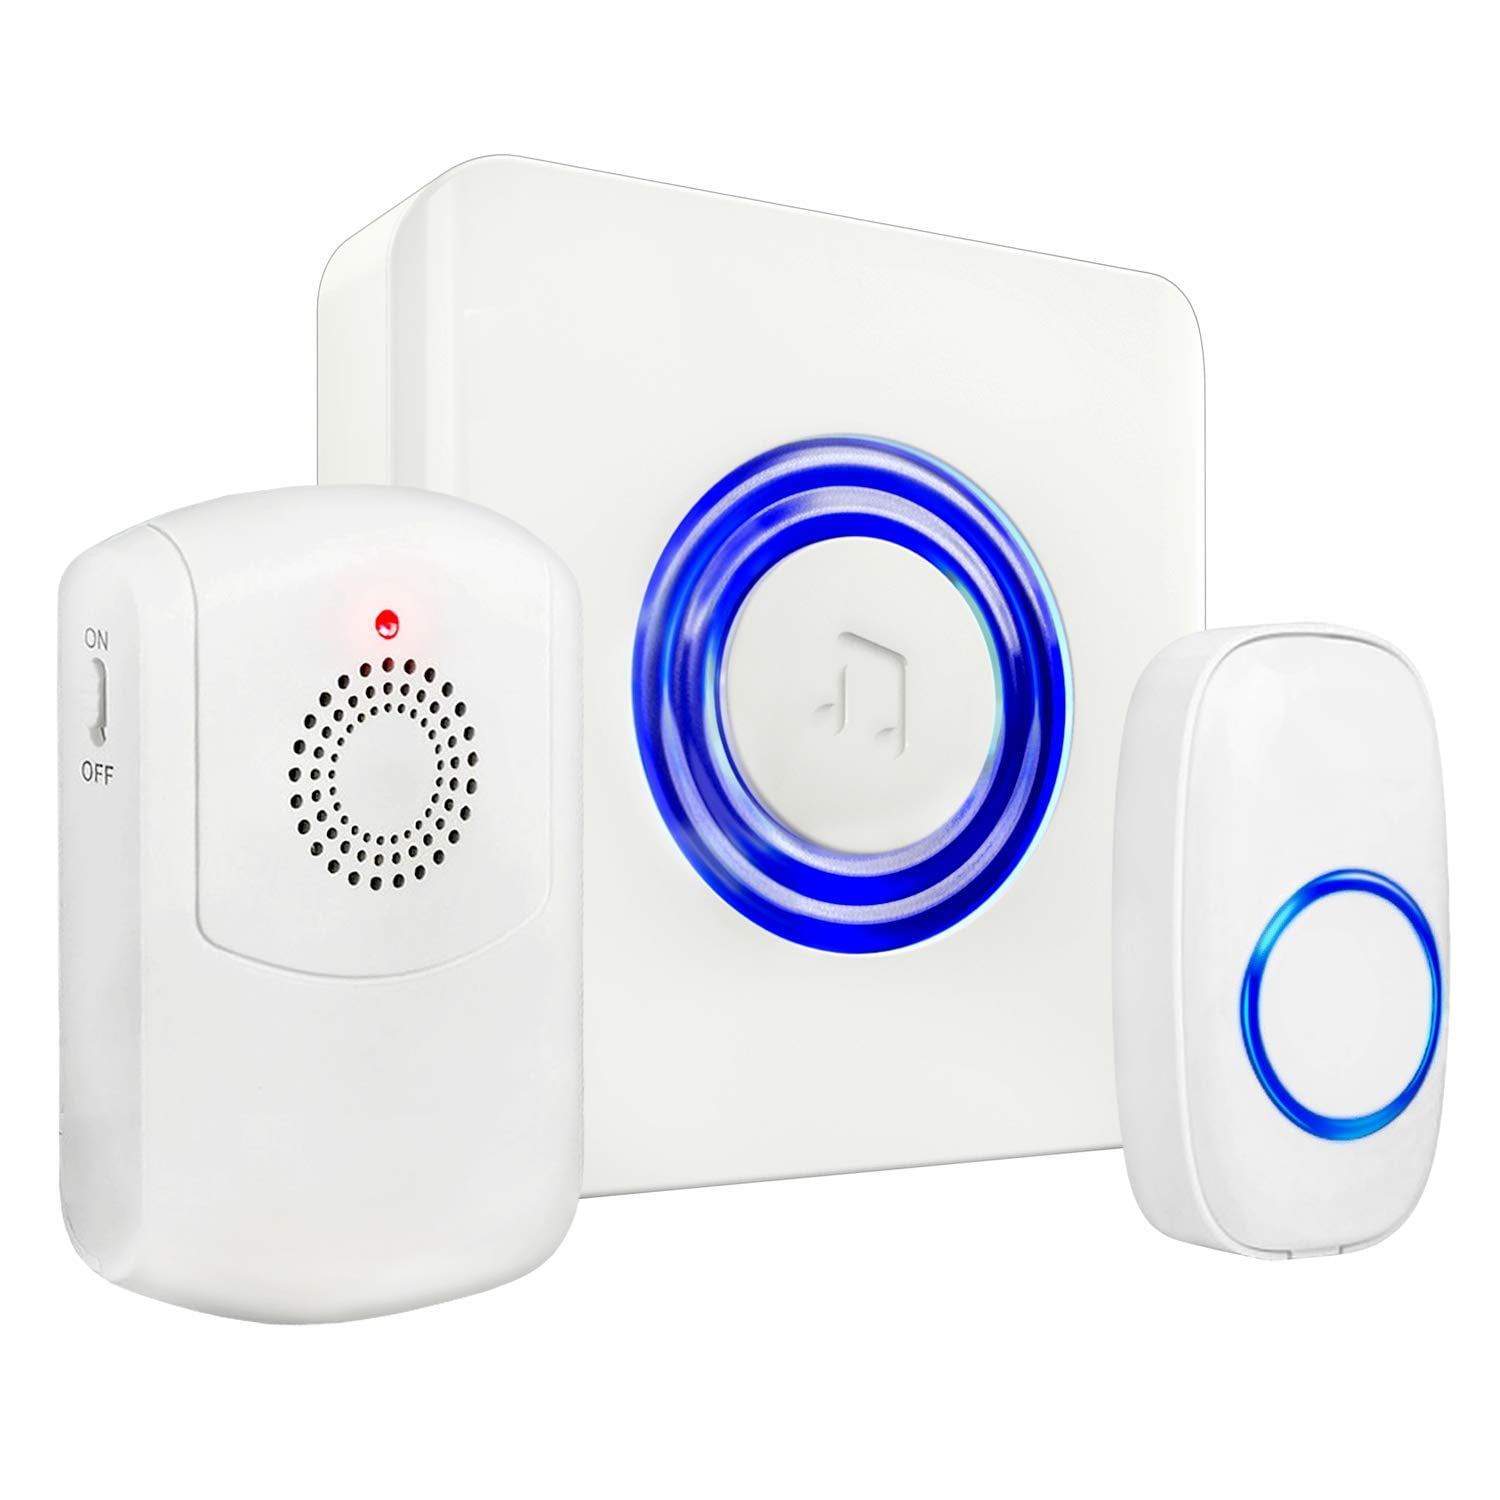 Extra Add-On Battery Free Plugin Receiver CROSSPOINT Expandable Wireless Doorbell Alert System White Model ER 